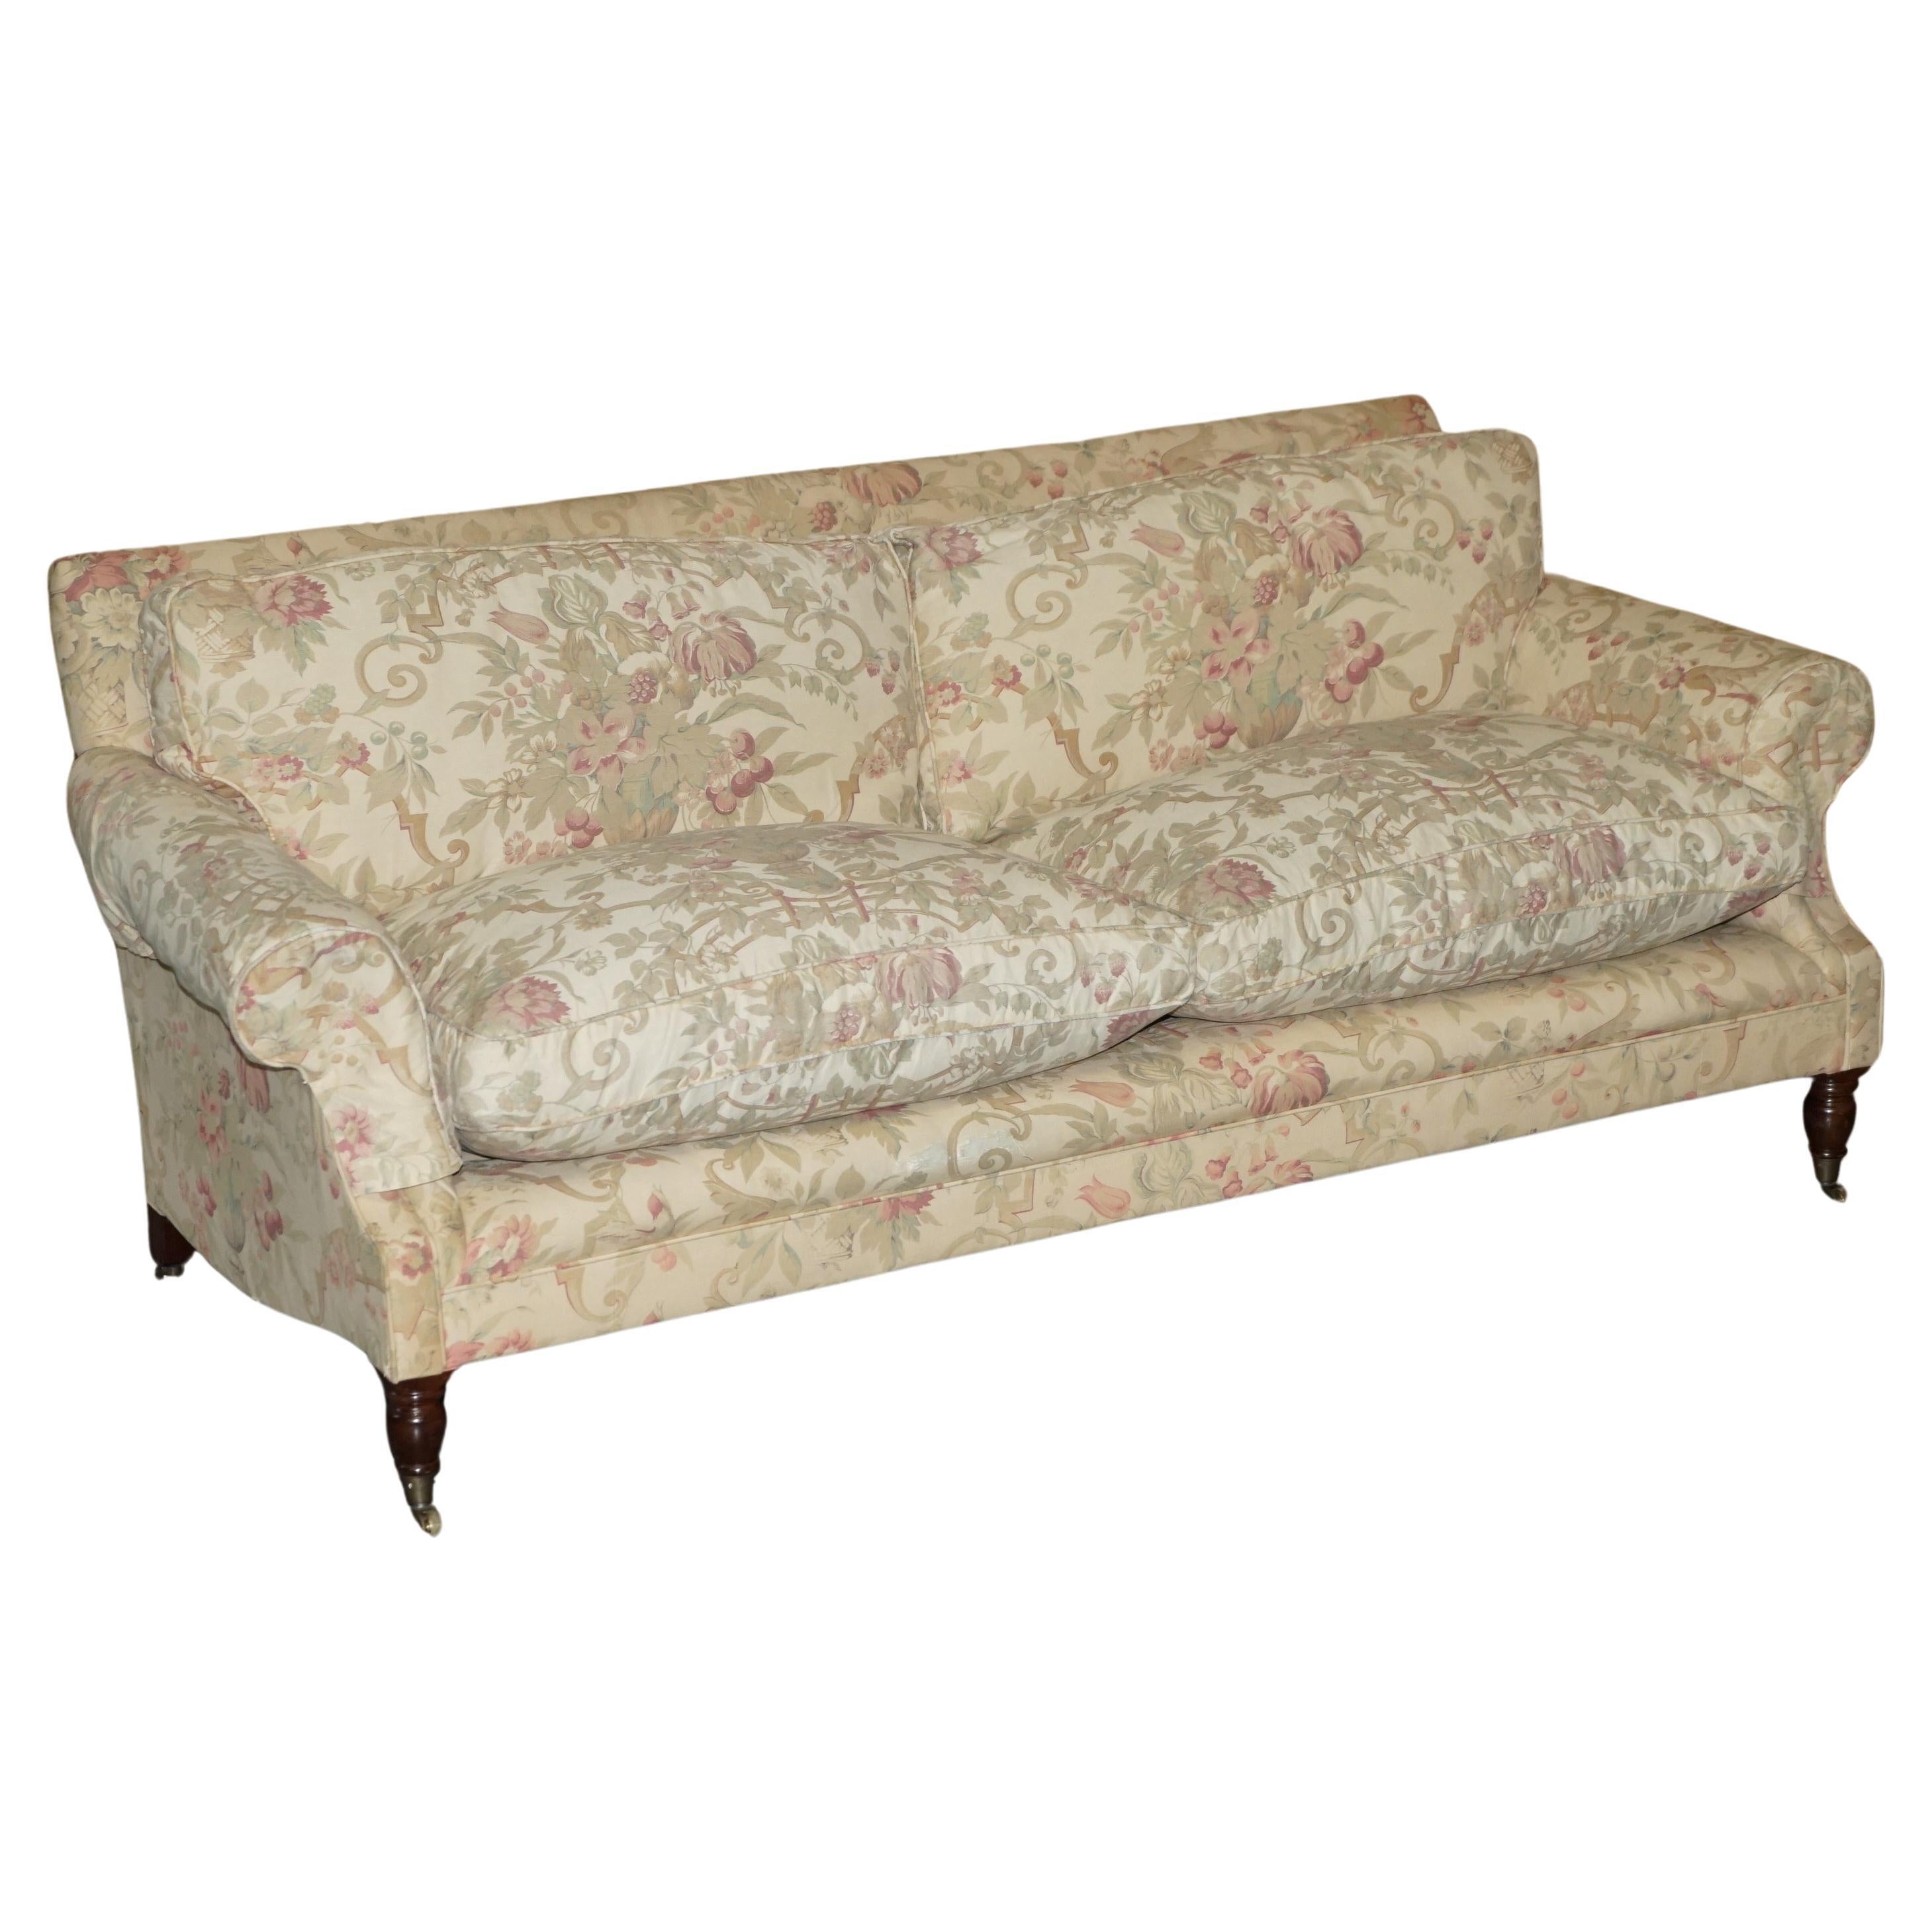 GEORGE SMITH CHELSEA 3 SEAT SOFA IN ORIGINAL UPHOLSTERY PART SUiTE For Sale